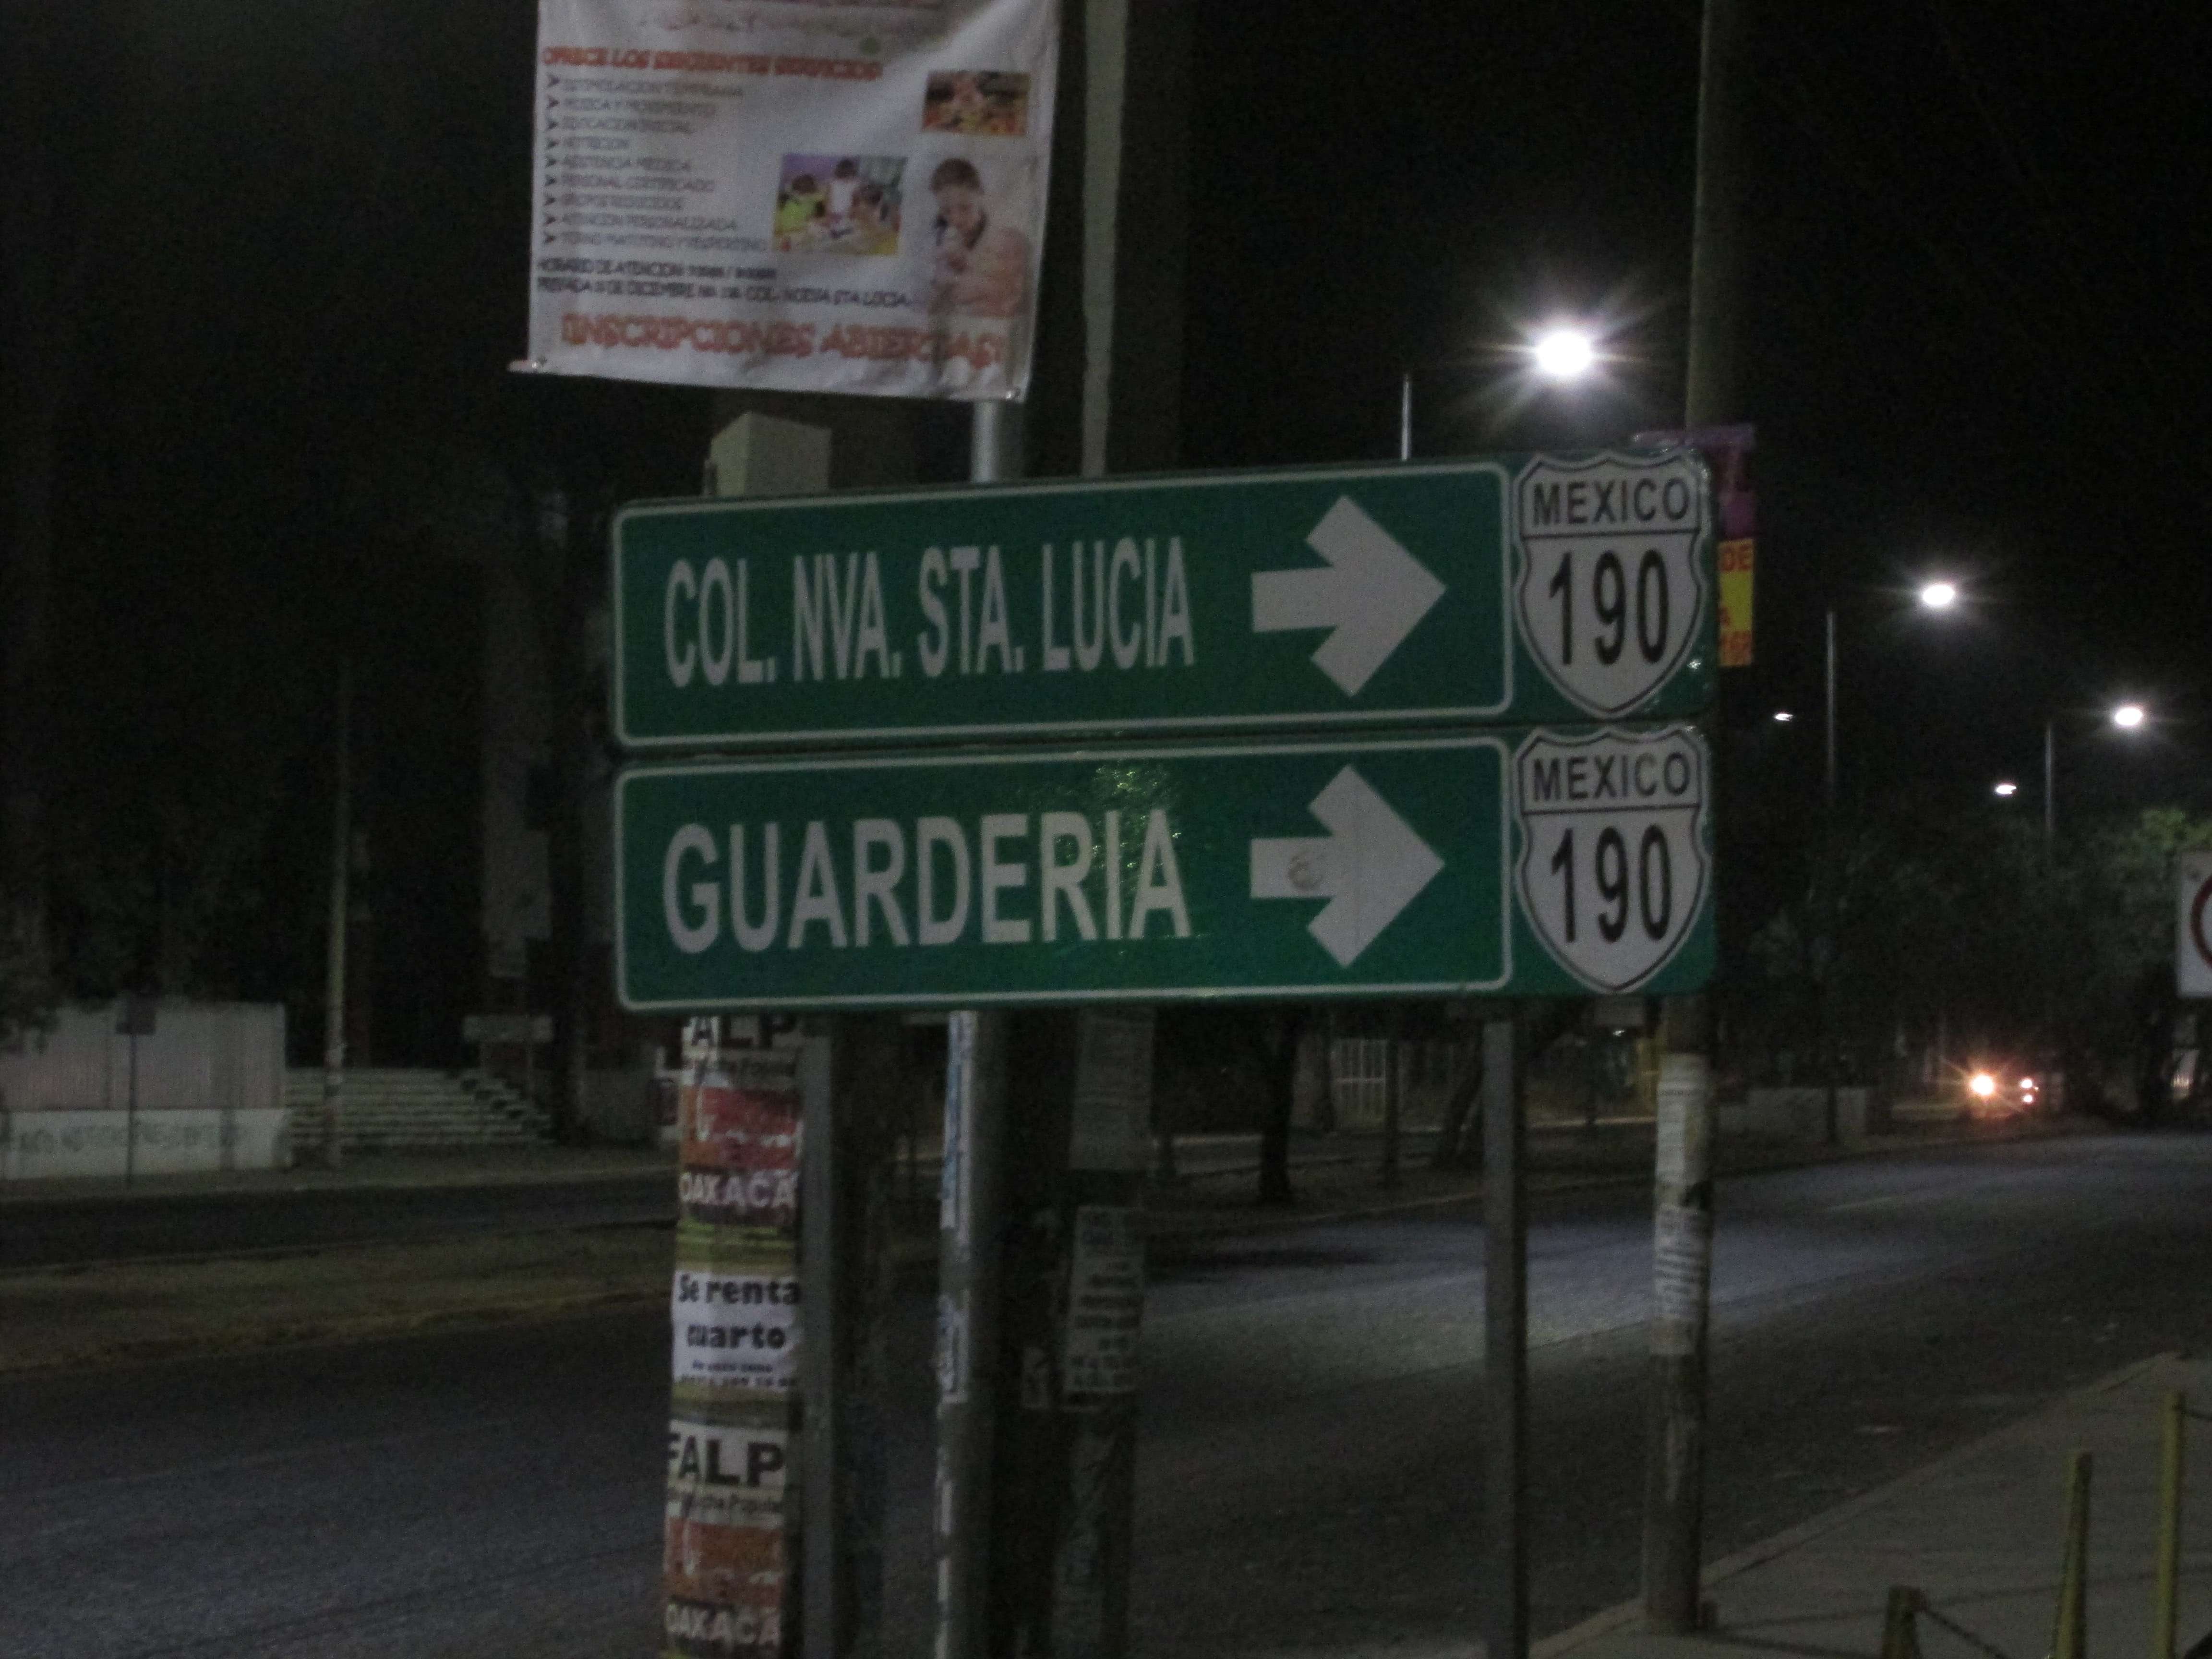 A photo of a road sign, pointing the way to highway 190, COL. NVA. STA. LUCIA, and GUARDERIA